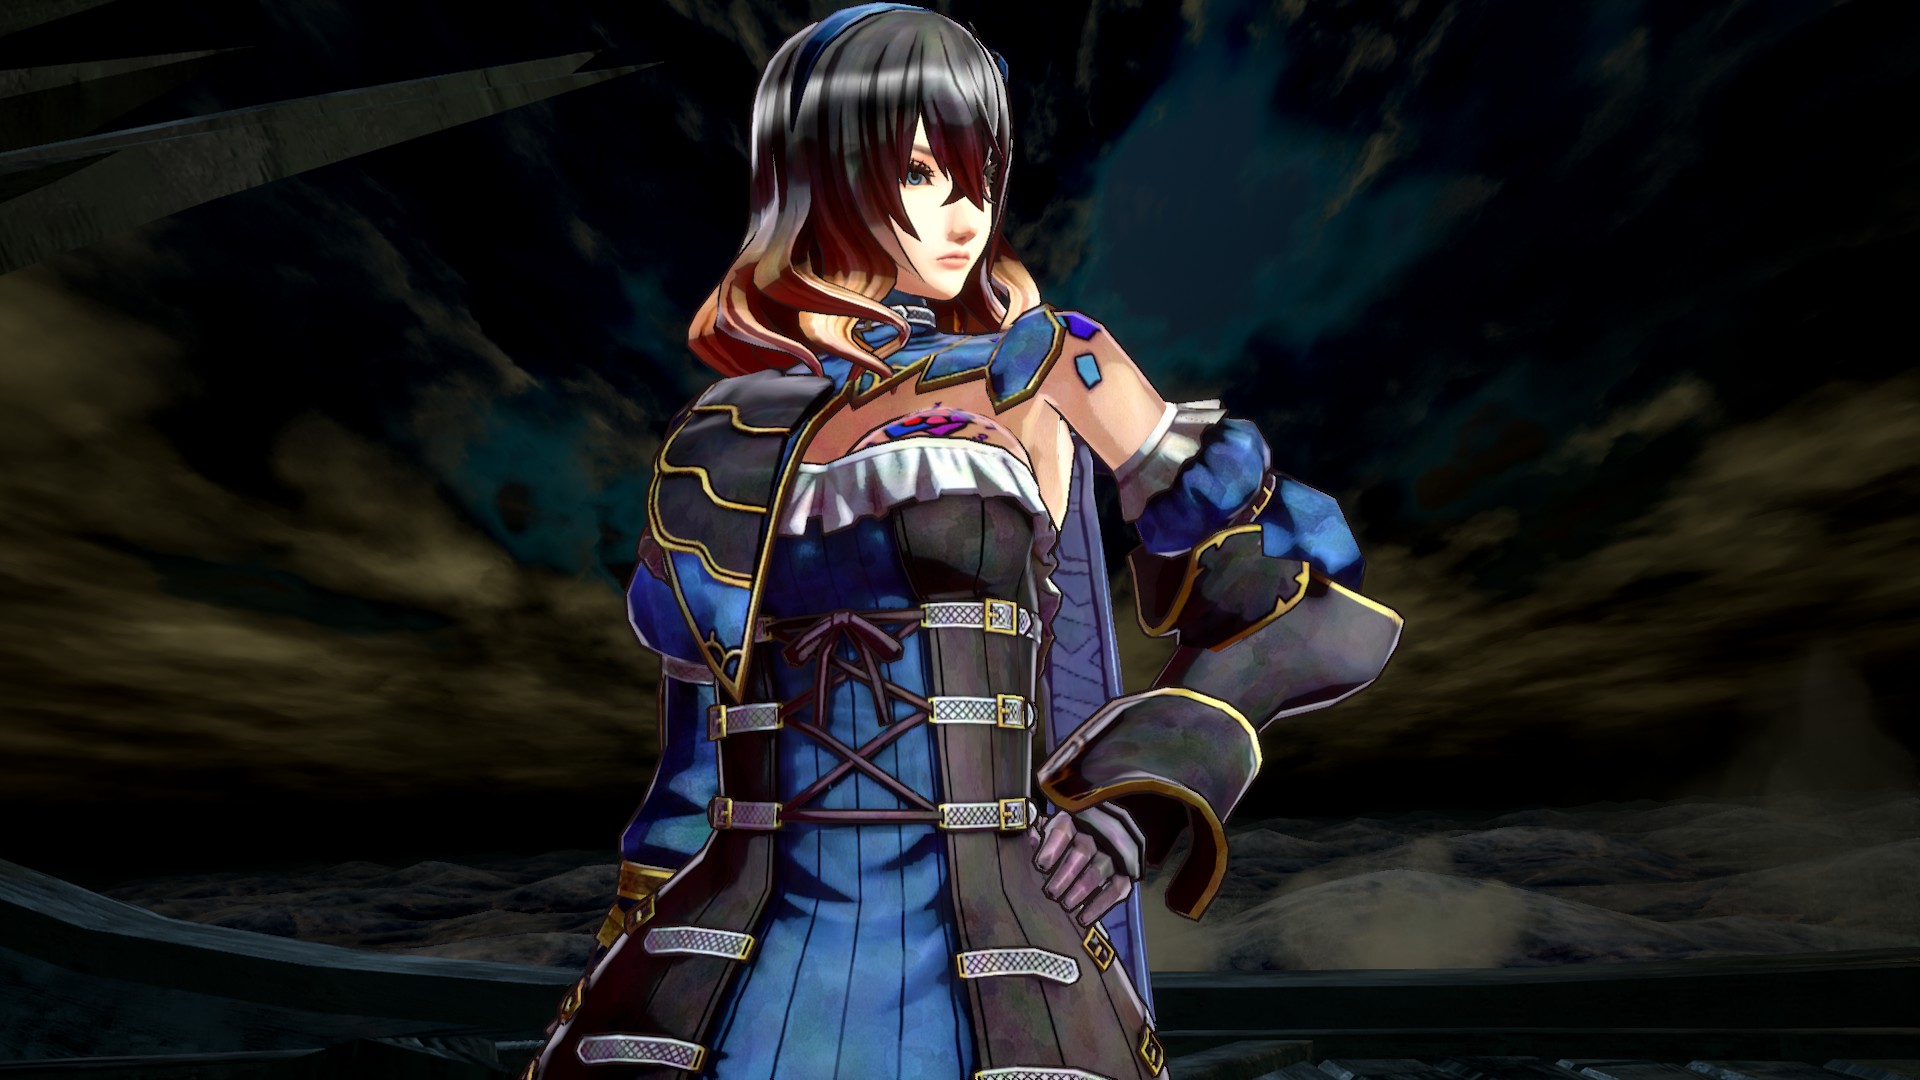 Ѫۣҹ֮ʽBloodstained: Ritual of the NightѪѲMOD